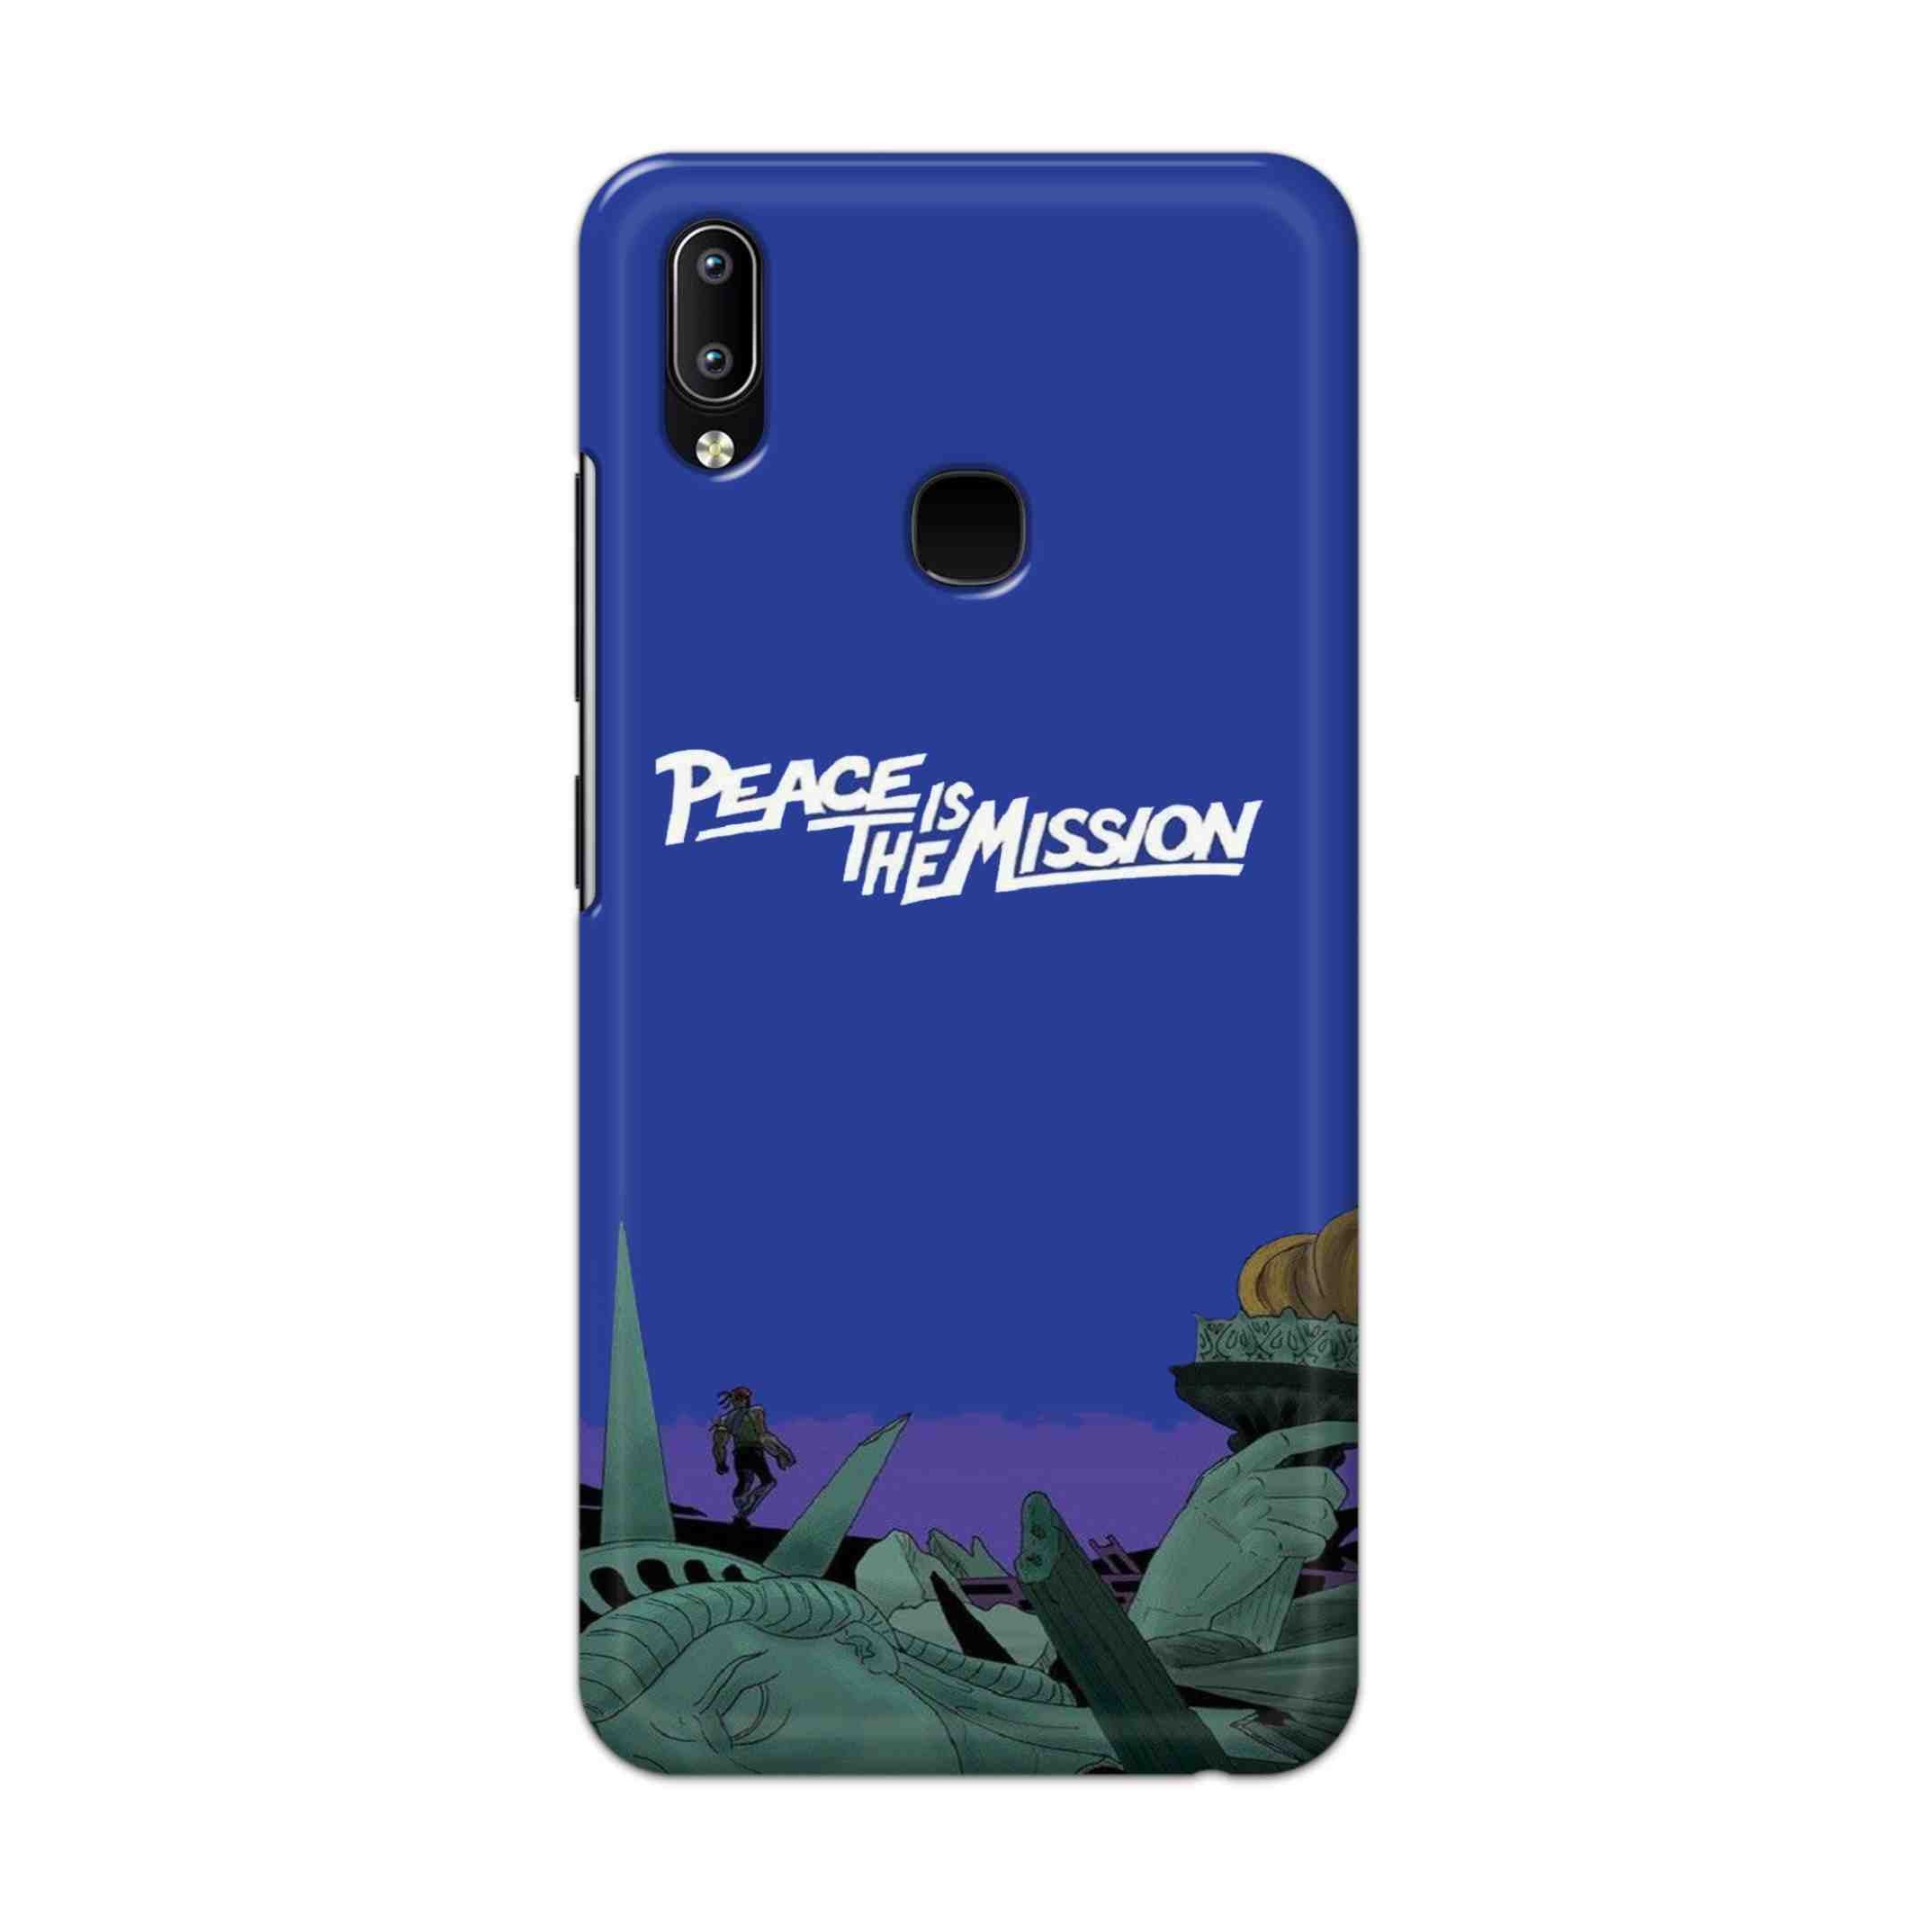 Buy Peace Is The Misson Hard Back Mobile Phone Case Cover For Vivo Y95 / Y93 / Y91 Online